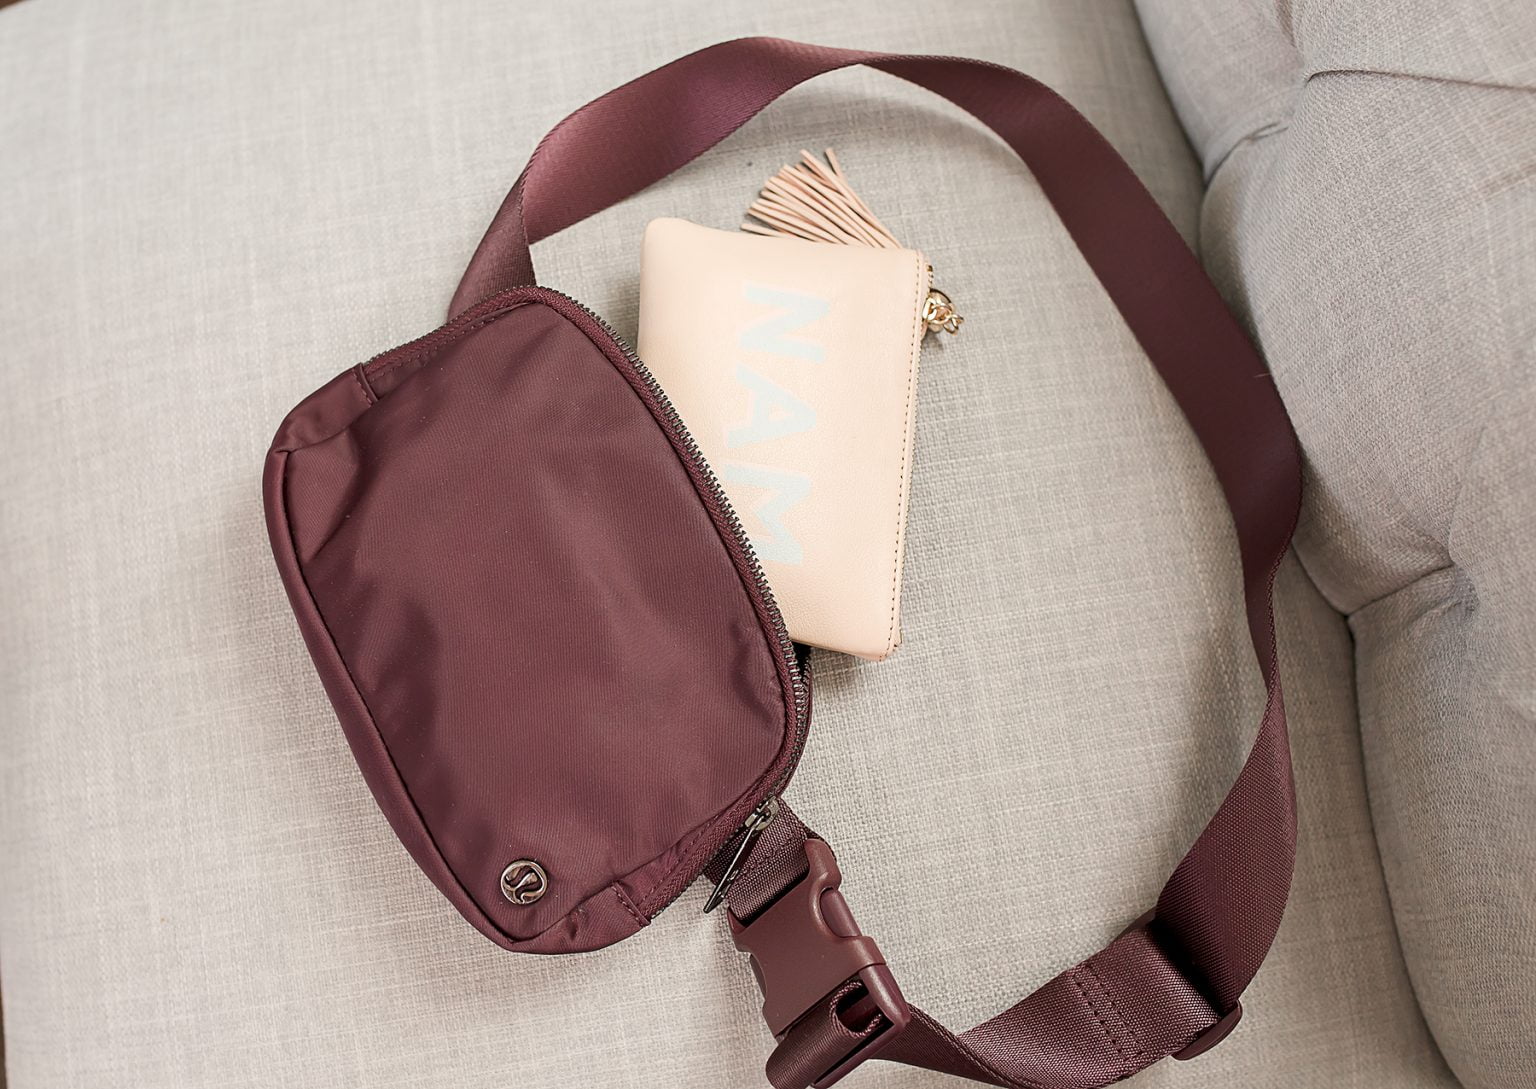 Lululemon Belt Bag Review - It Starts With Coffee - Blog by Neely